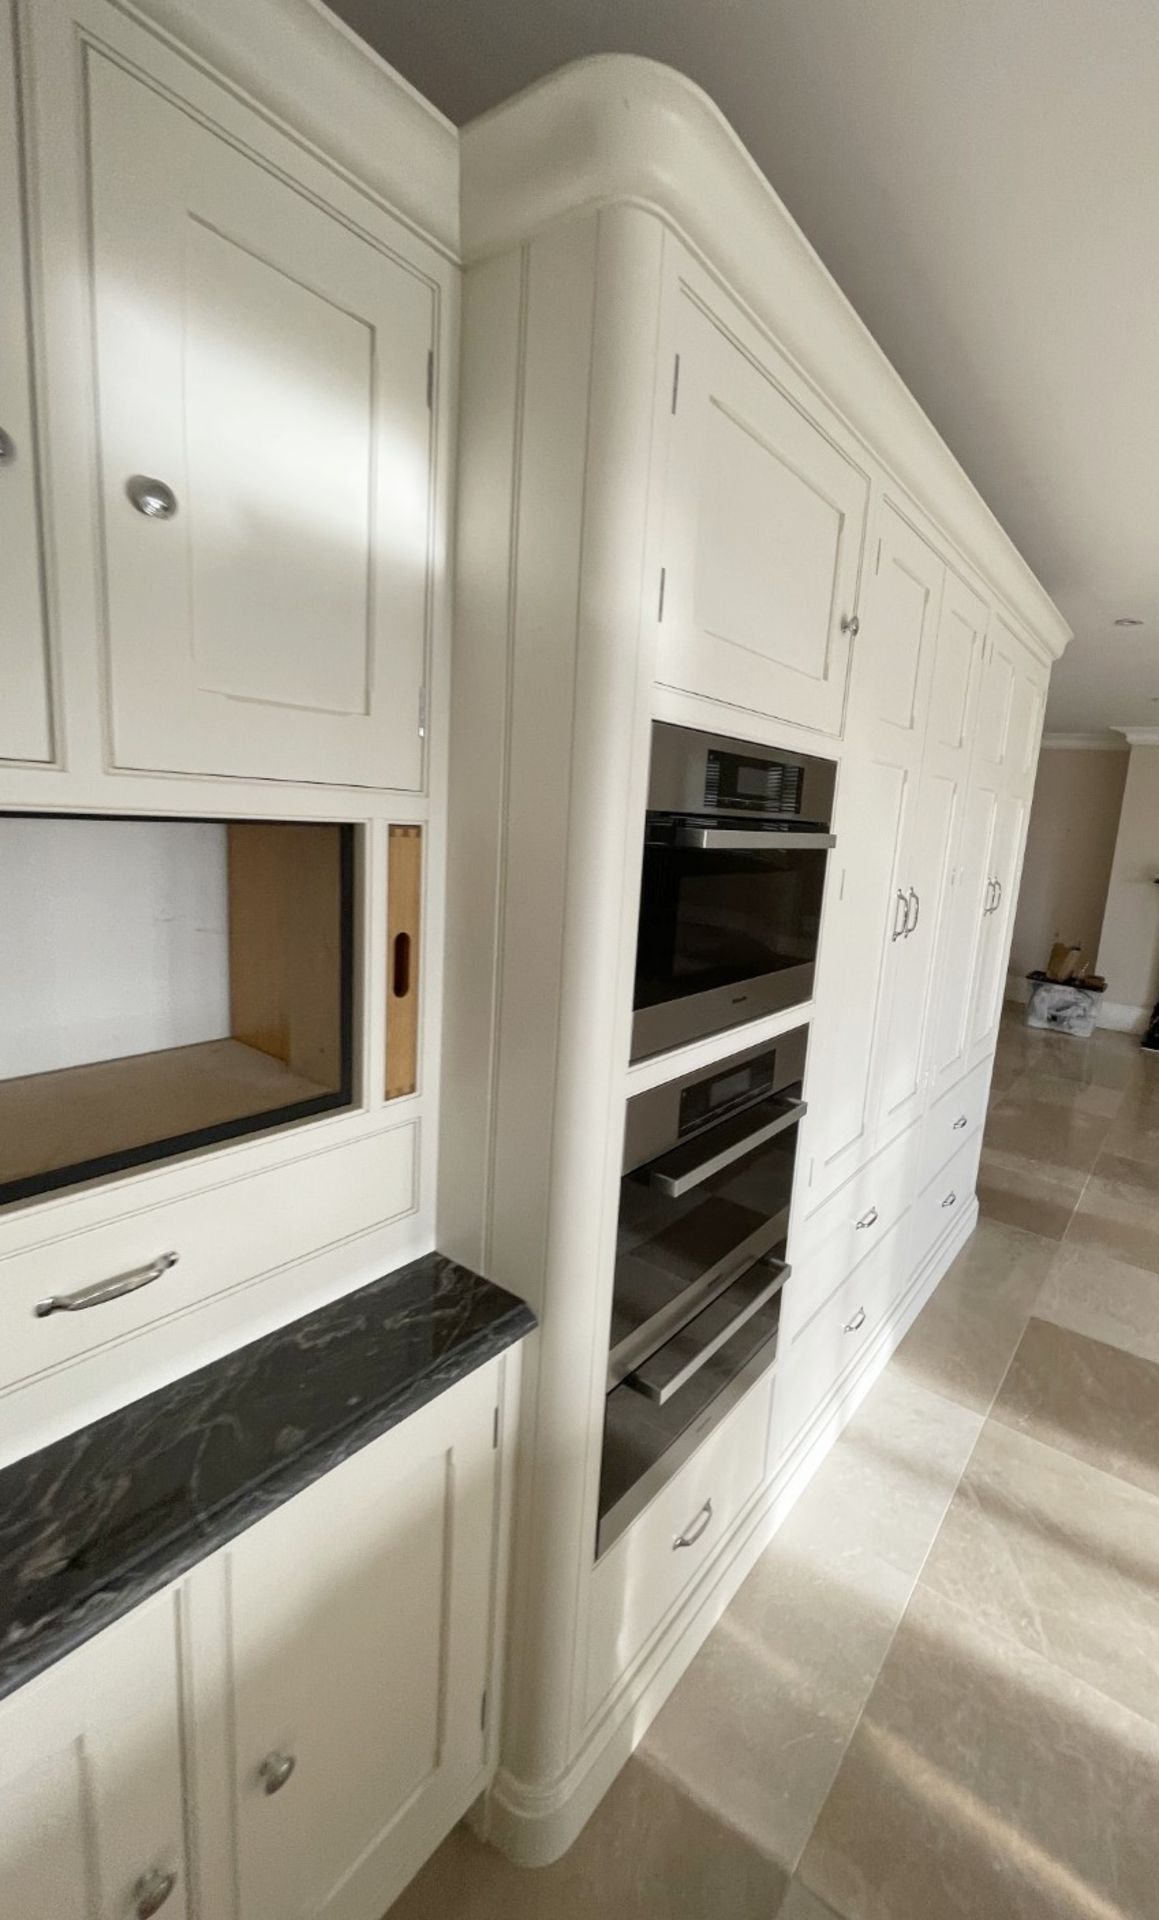 1 x Bespoke Handcrafted Shaker-style Fitted Kitchen Marble Surfaces, Island & Miele Appliances - Image 177 of 221